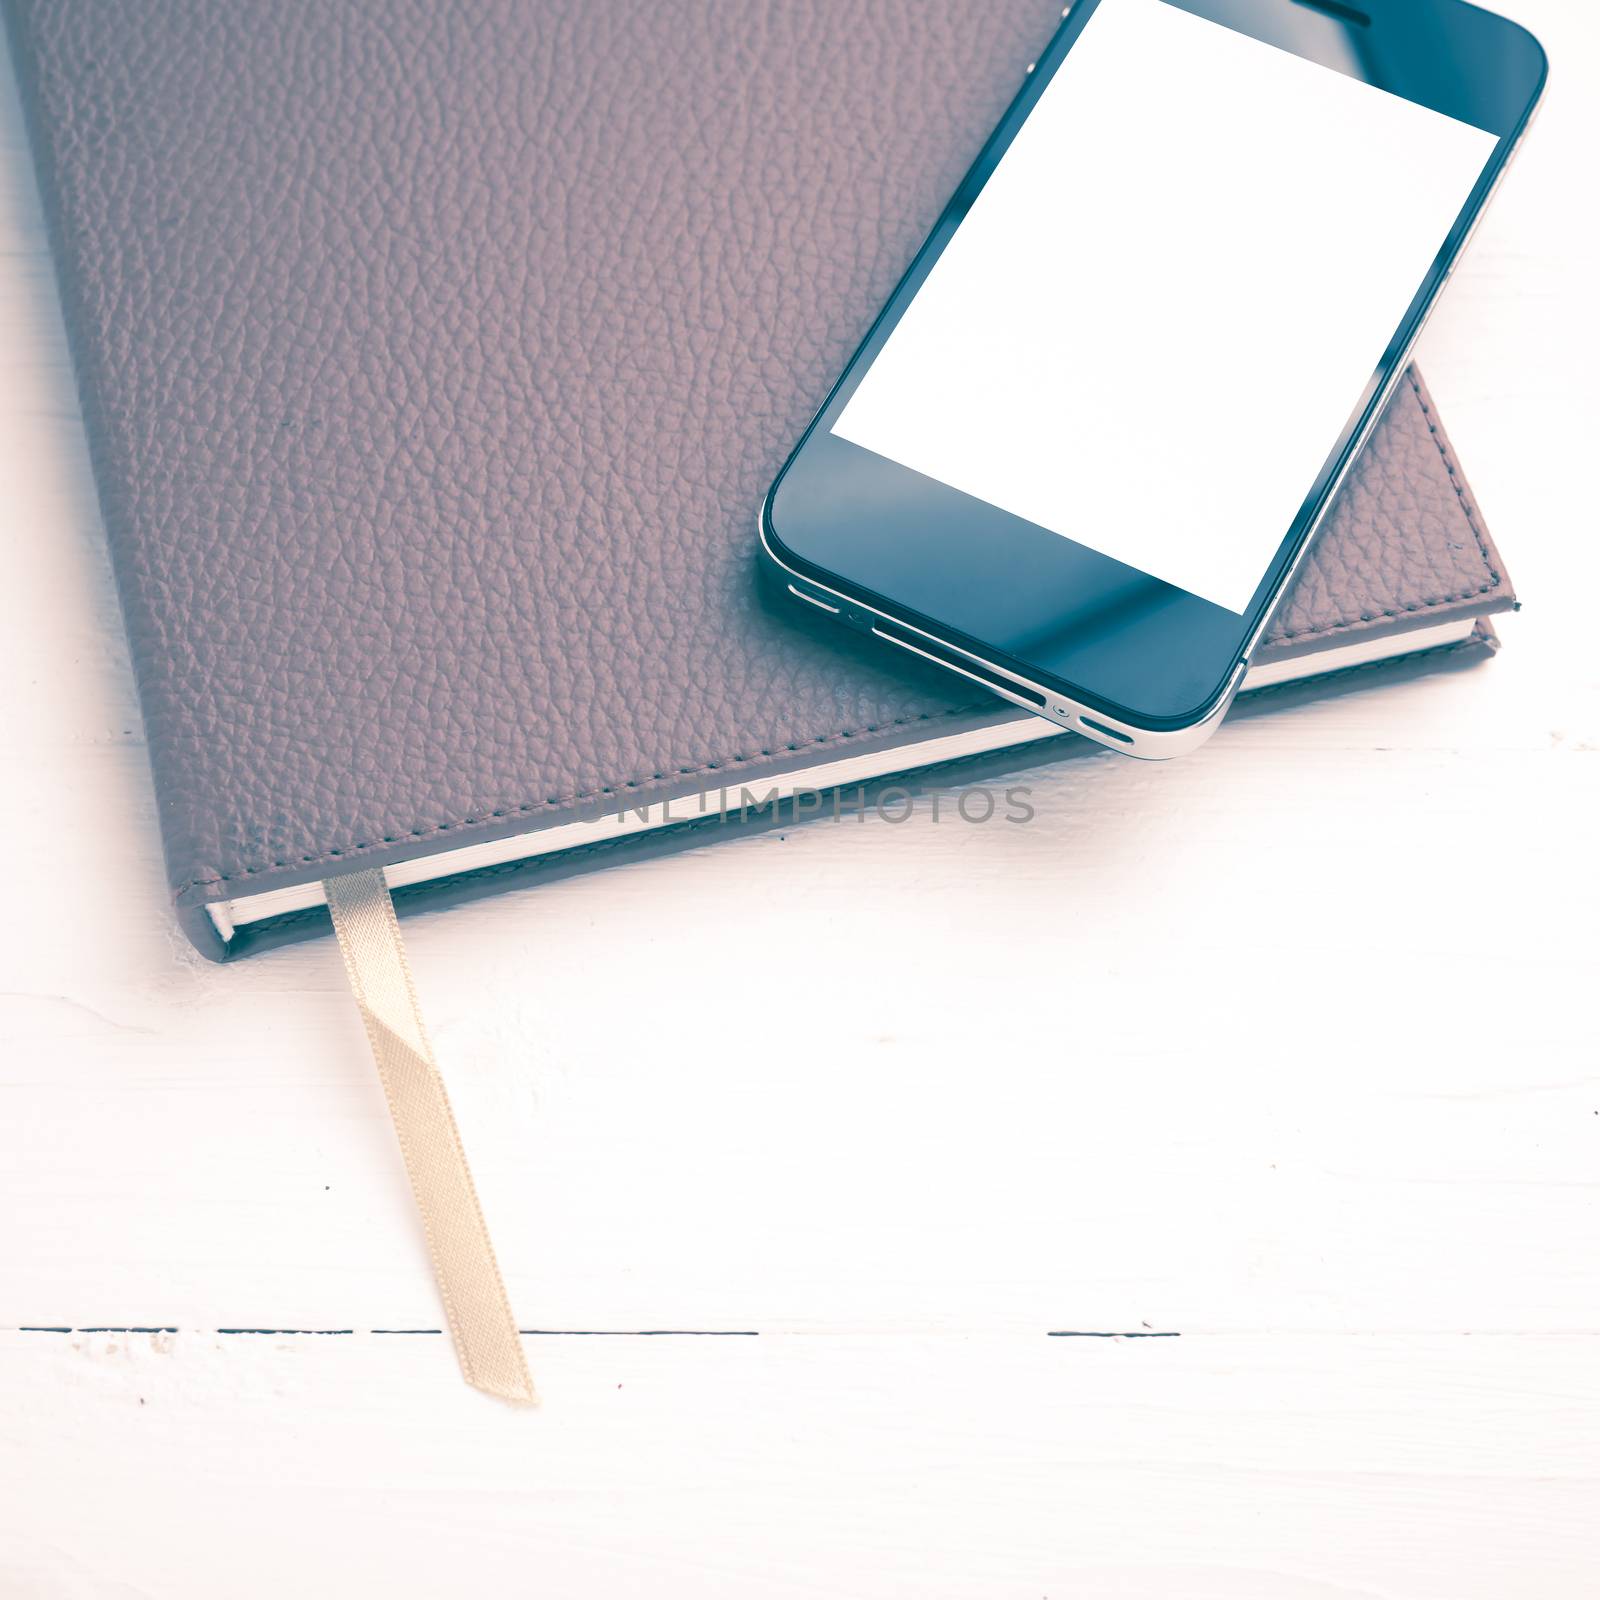 cellphone on notebook vintage style by ammza12